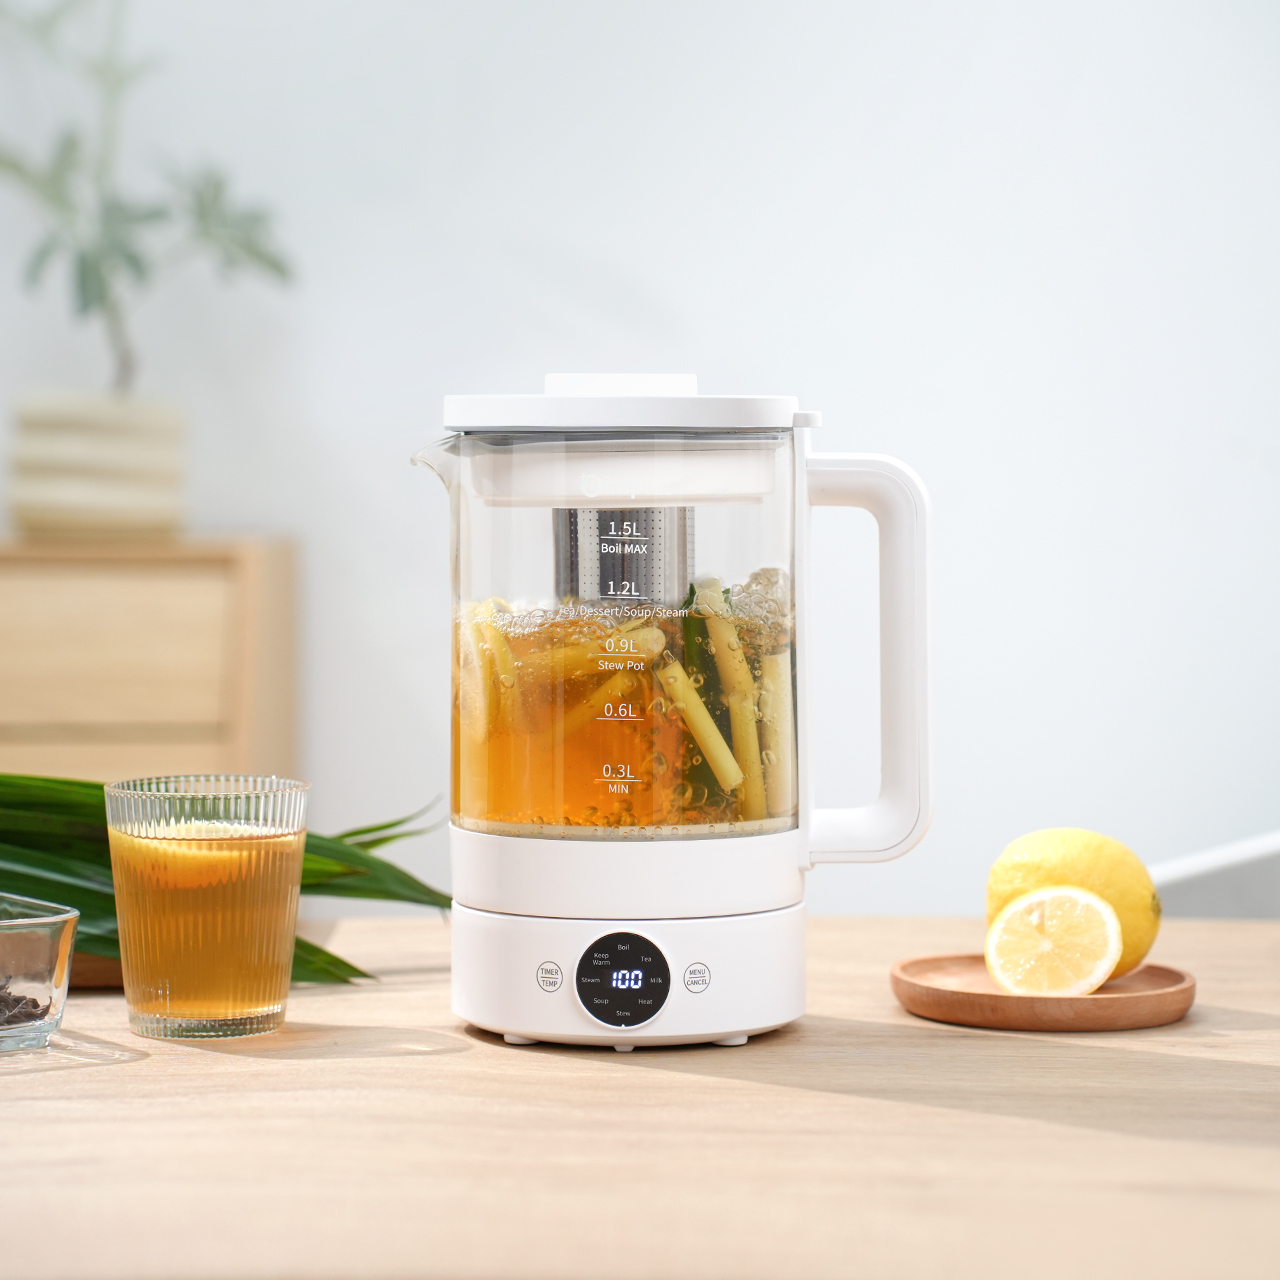 Video - Electric Kettle YSHU001 TH